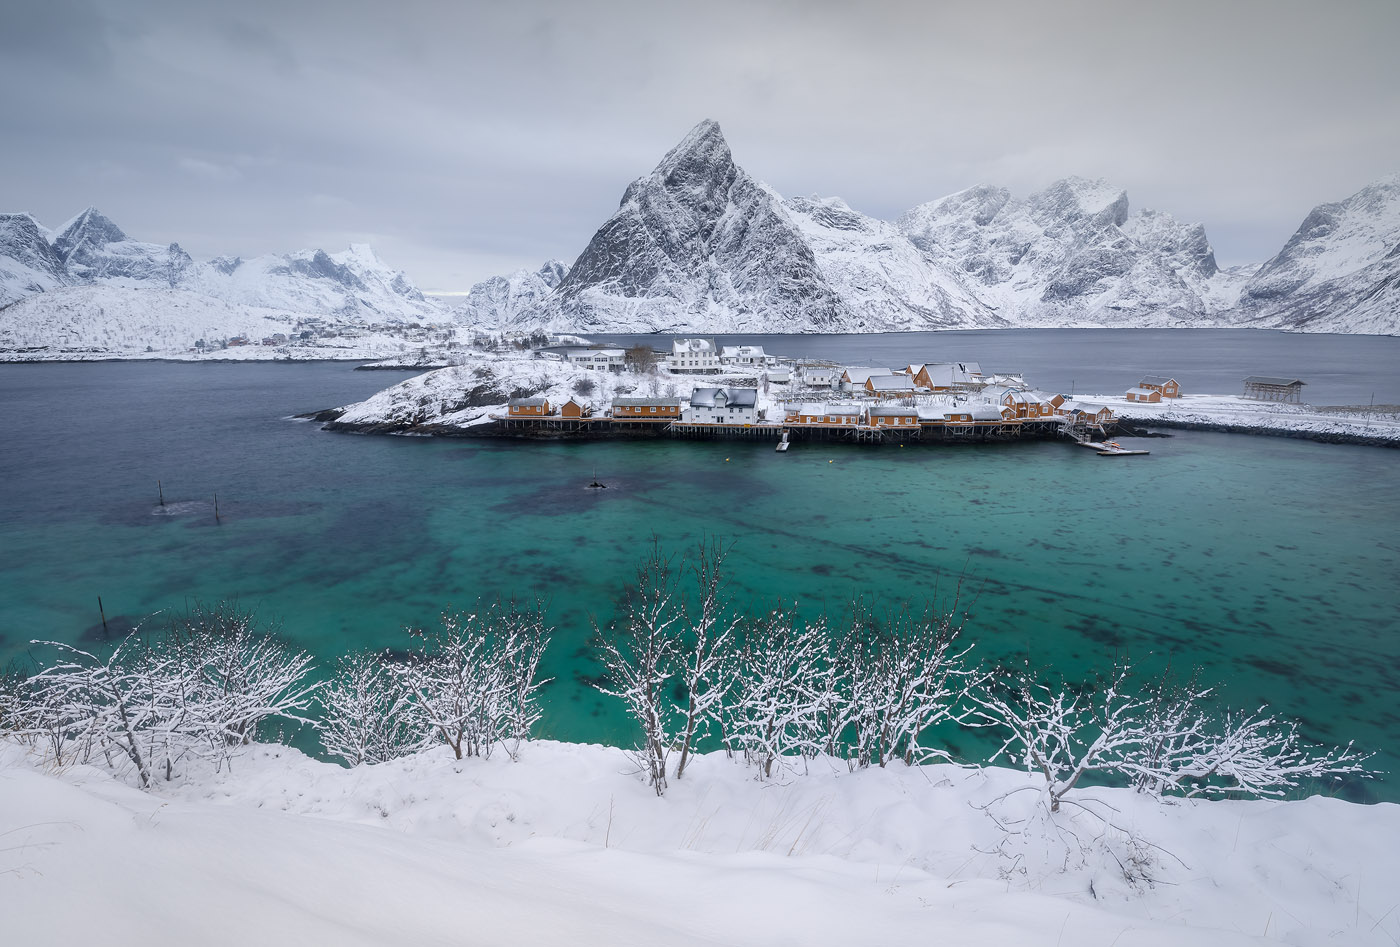 A more–original–than–most shot toward Sakrisøy, Norway. The snow-laden trees in the foreground allowed me to include another layer in the composition and made this shot a bit different. Still, not super original, since this is an overshot location and the orange cabins are well known.  Canon EOS 5D Mark IV, Canon 16–35mm F2.8 III, 3.2 sec, f/13, ISO 100 Sakrisøy, The Lofoten Islands, Arctic Norway